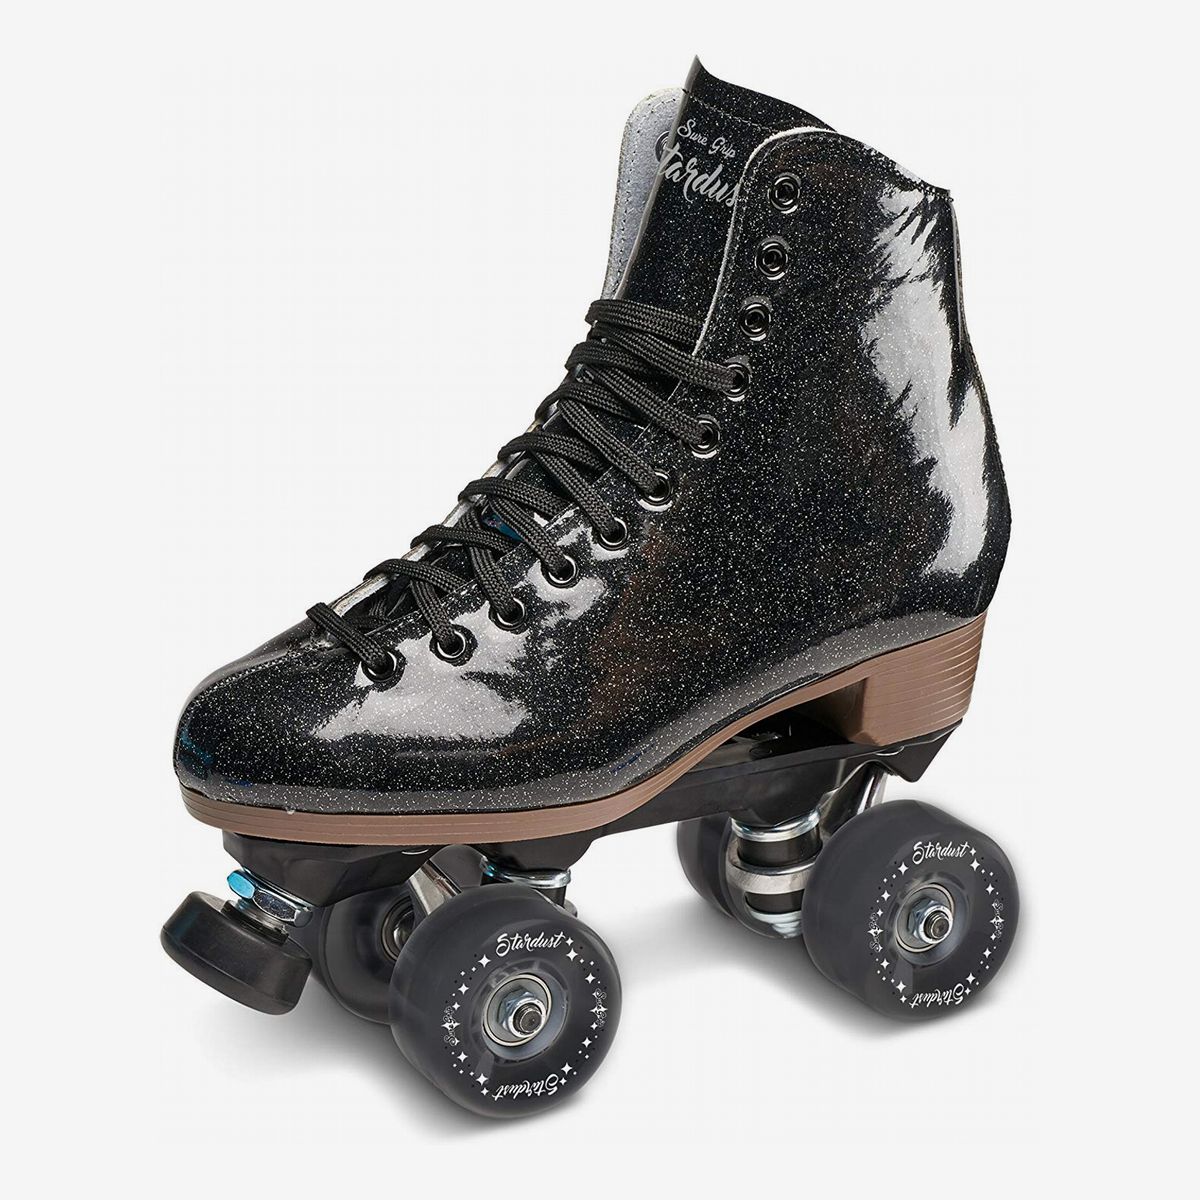 LEAFIS Womens Roller Skates Adult Classic High Top Canvas Roller Skates Double Row Light Up Skates Four-Wheel Shiny Roller Skates Perfect Indoor Outdoor with Bag 